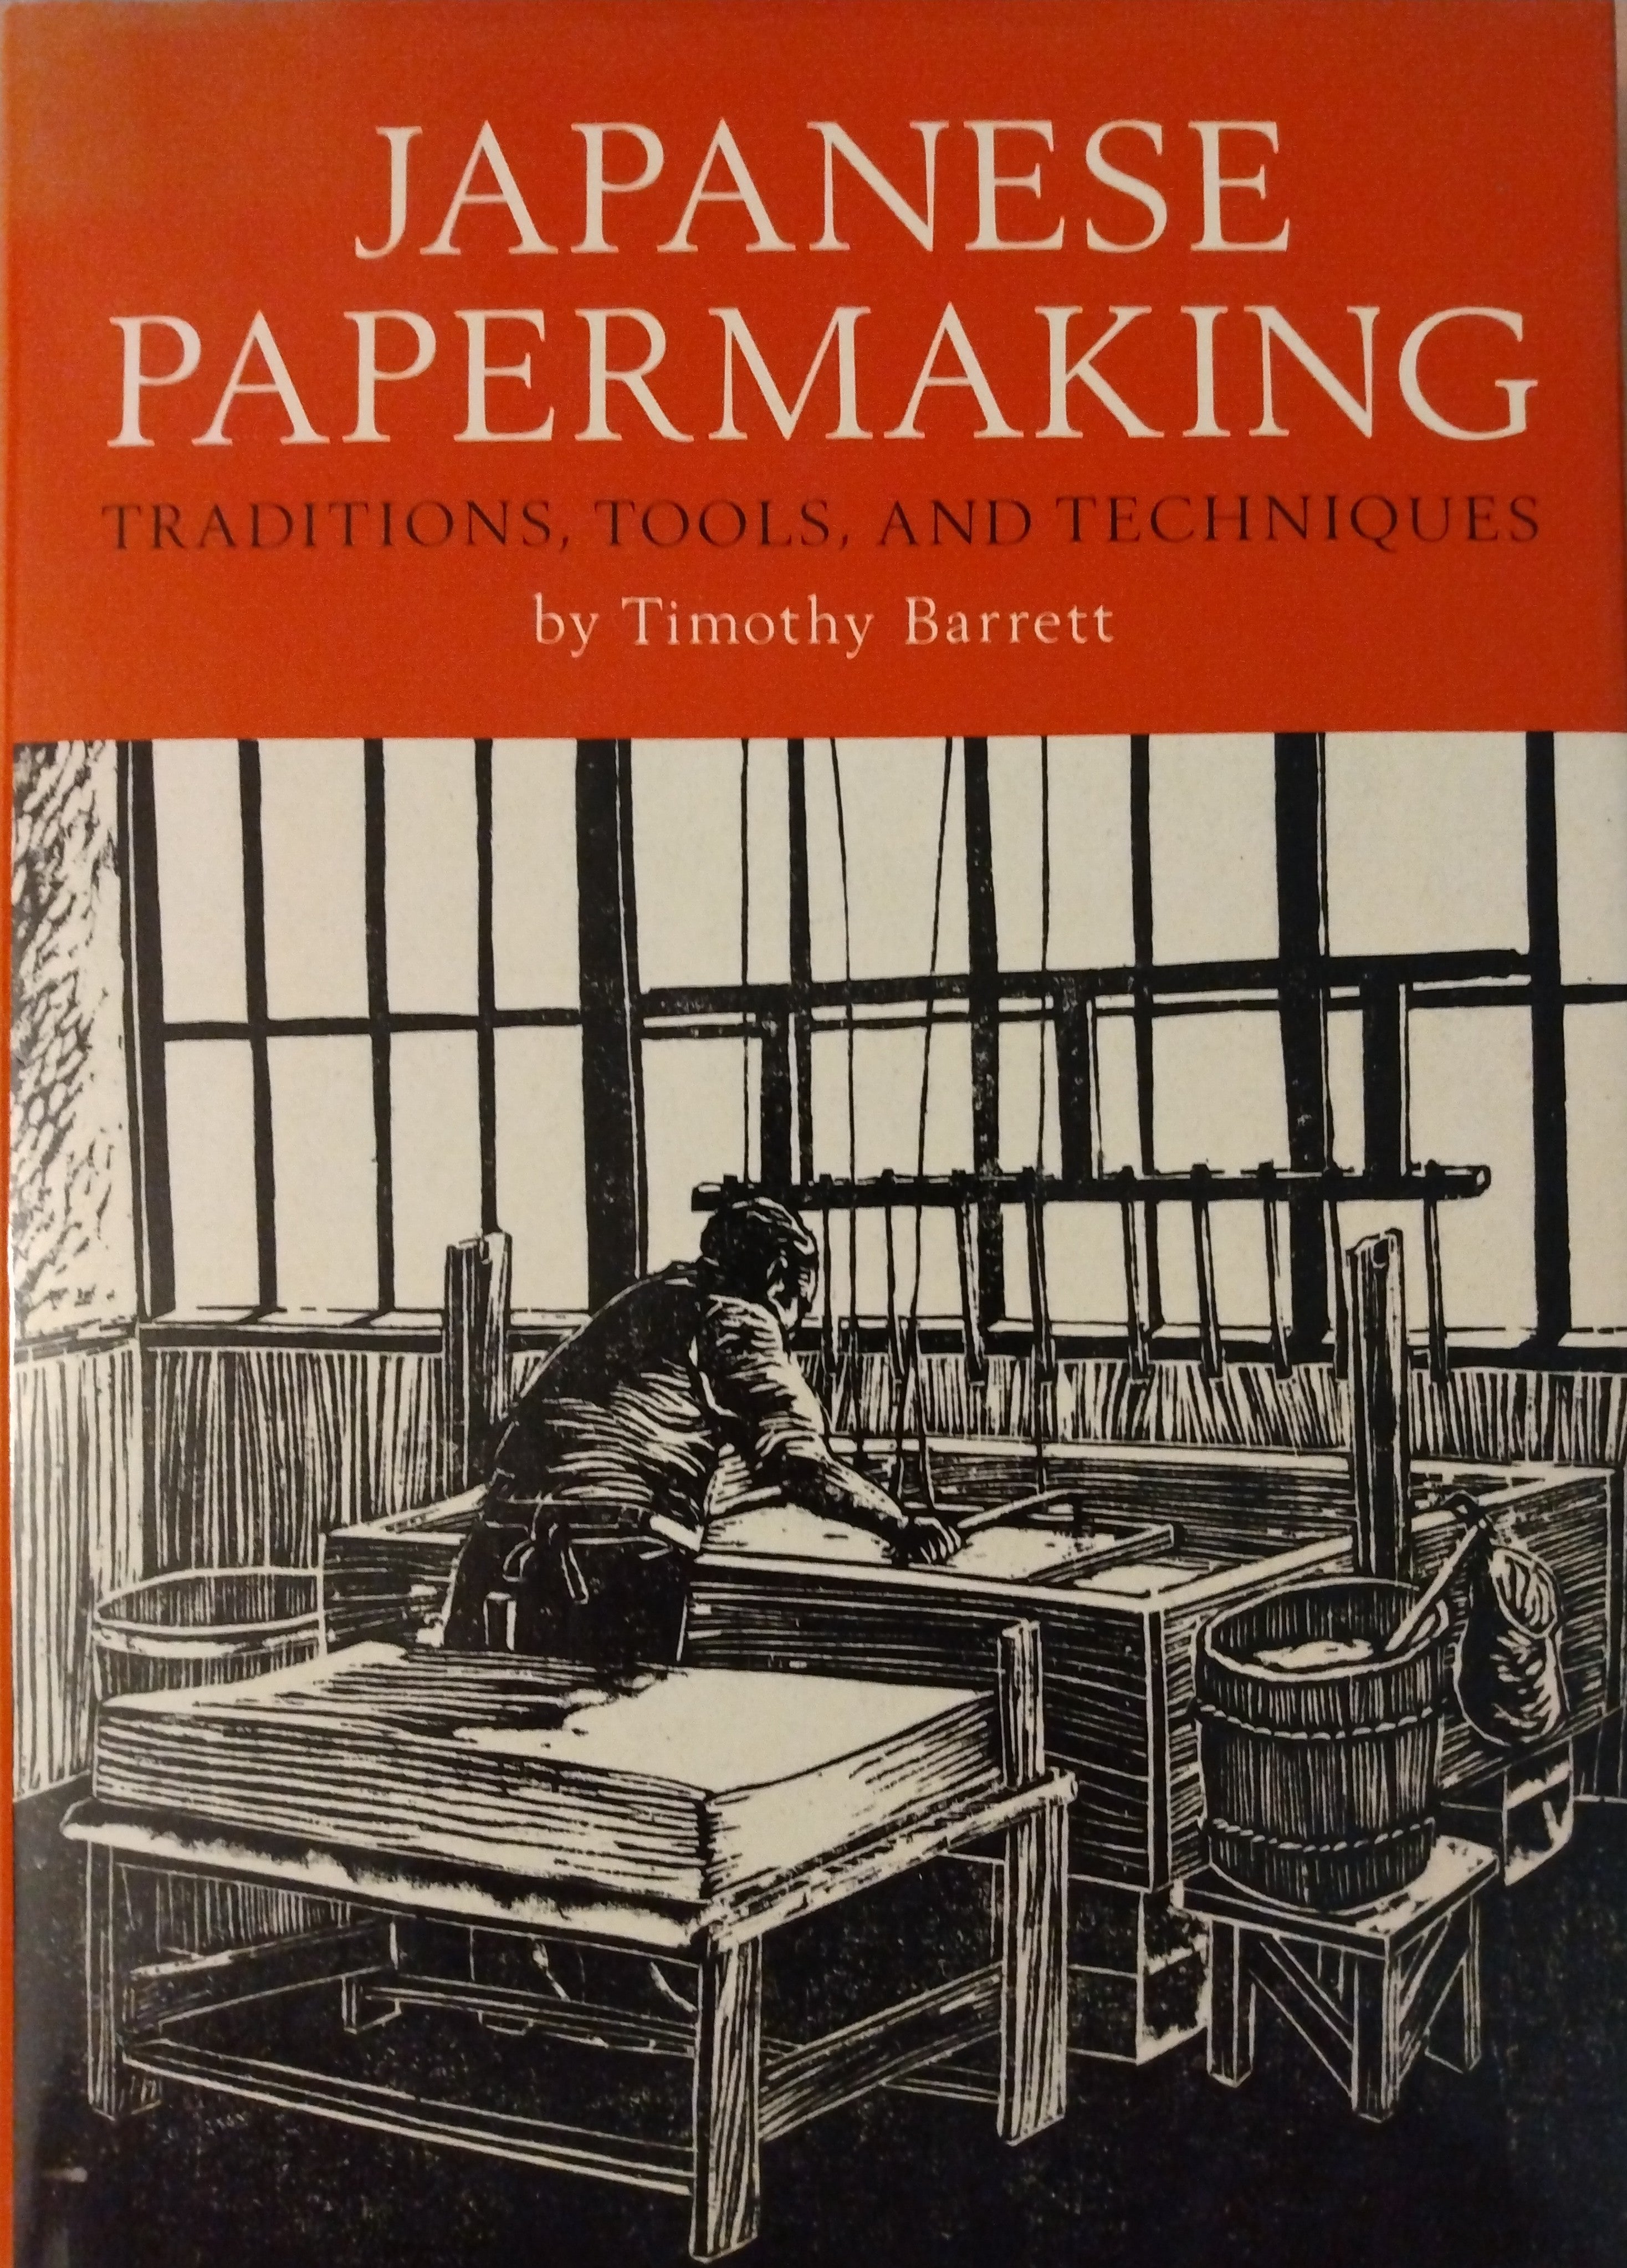 "Japanese Papermaking", by Timothy Barrett; Thiel Collection